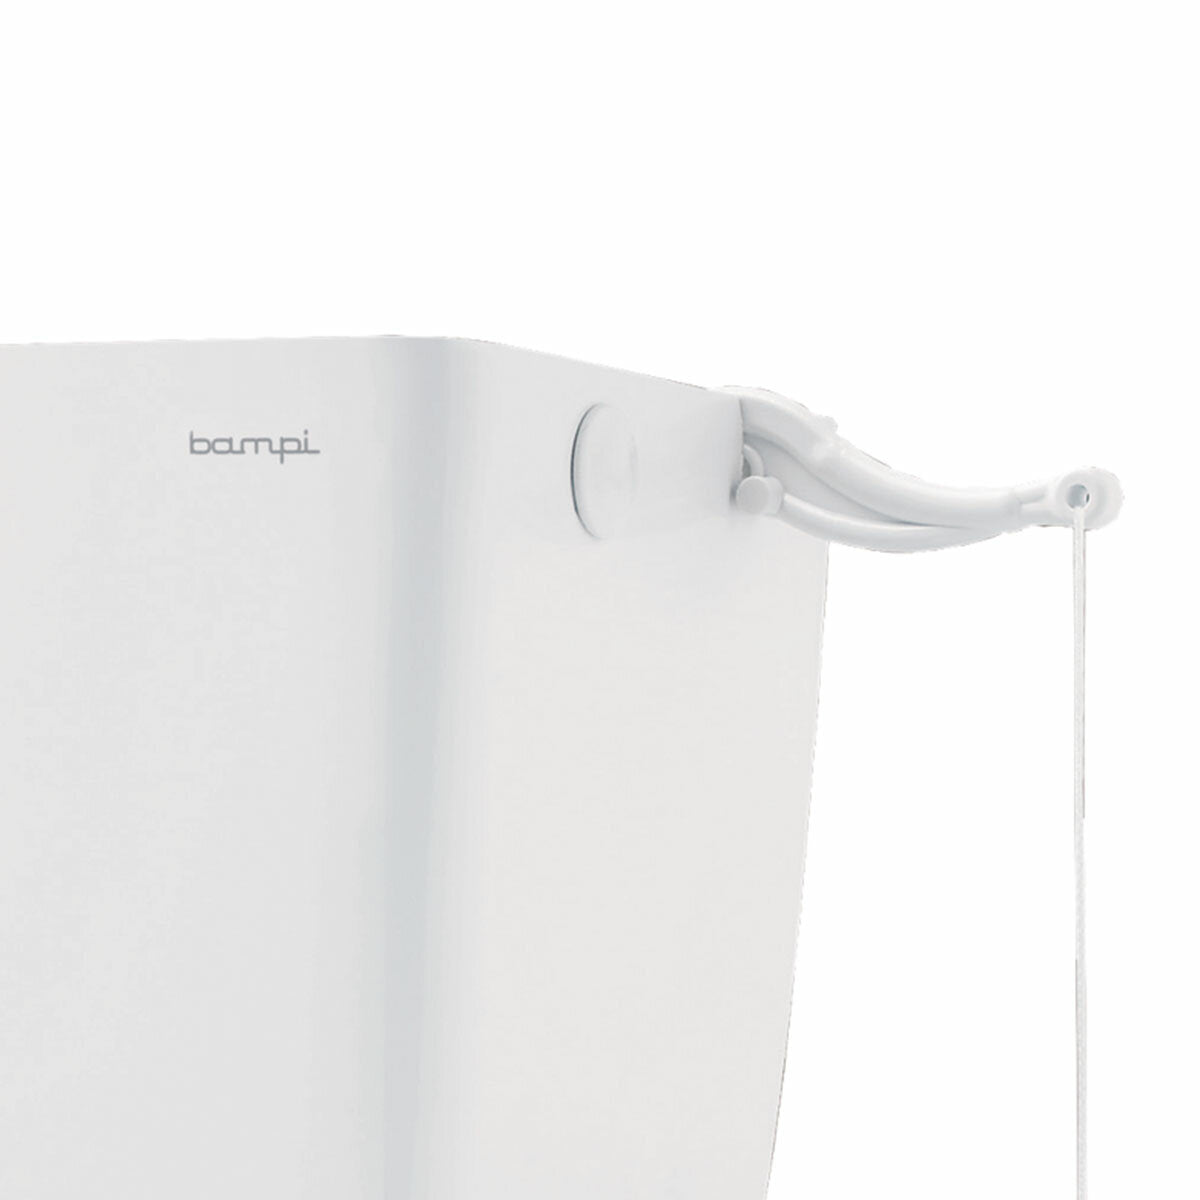 Bampi BLANKA high external cistern for WC with chain